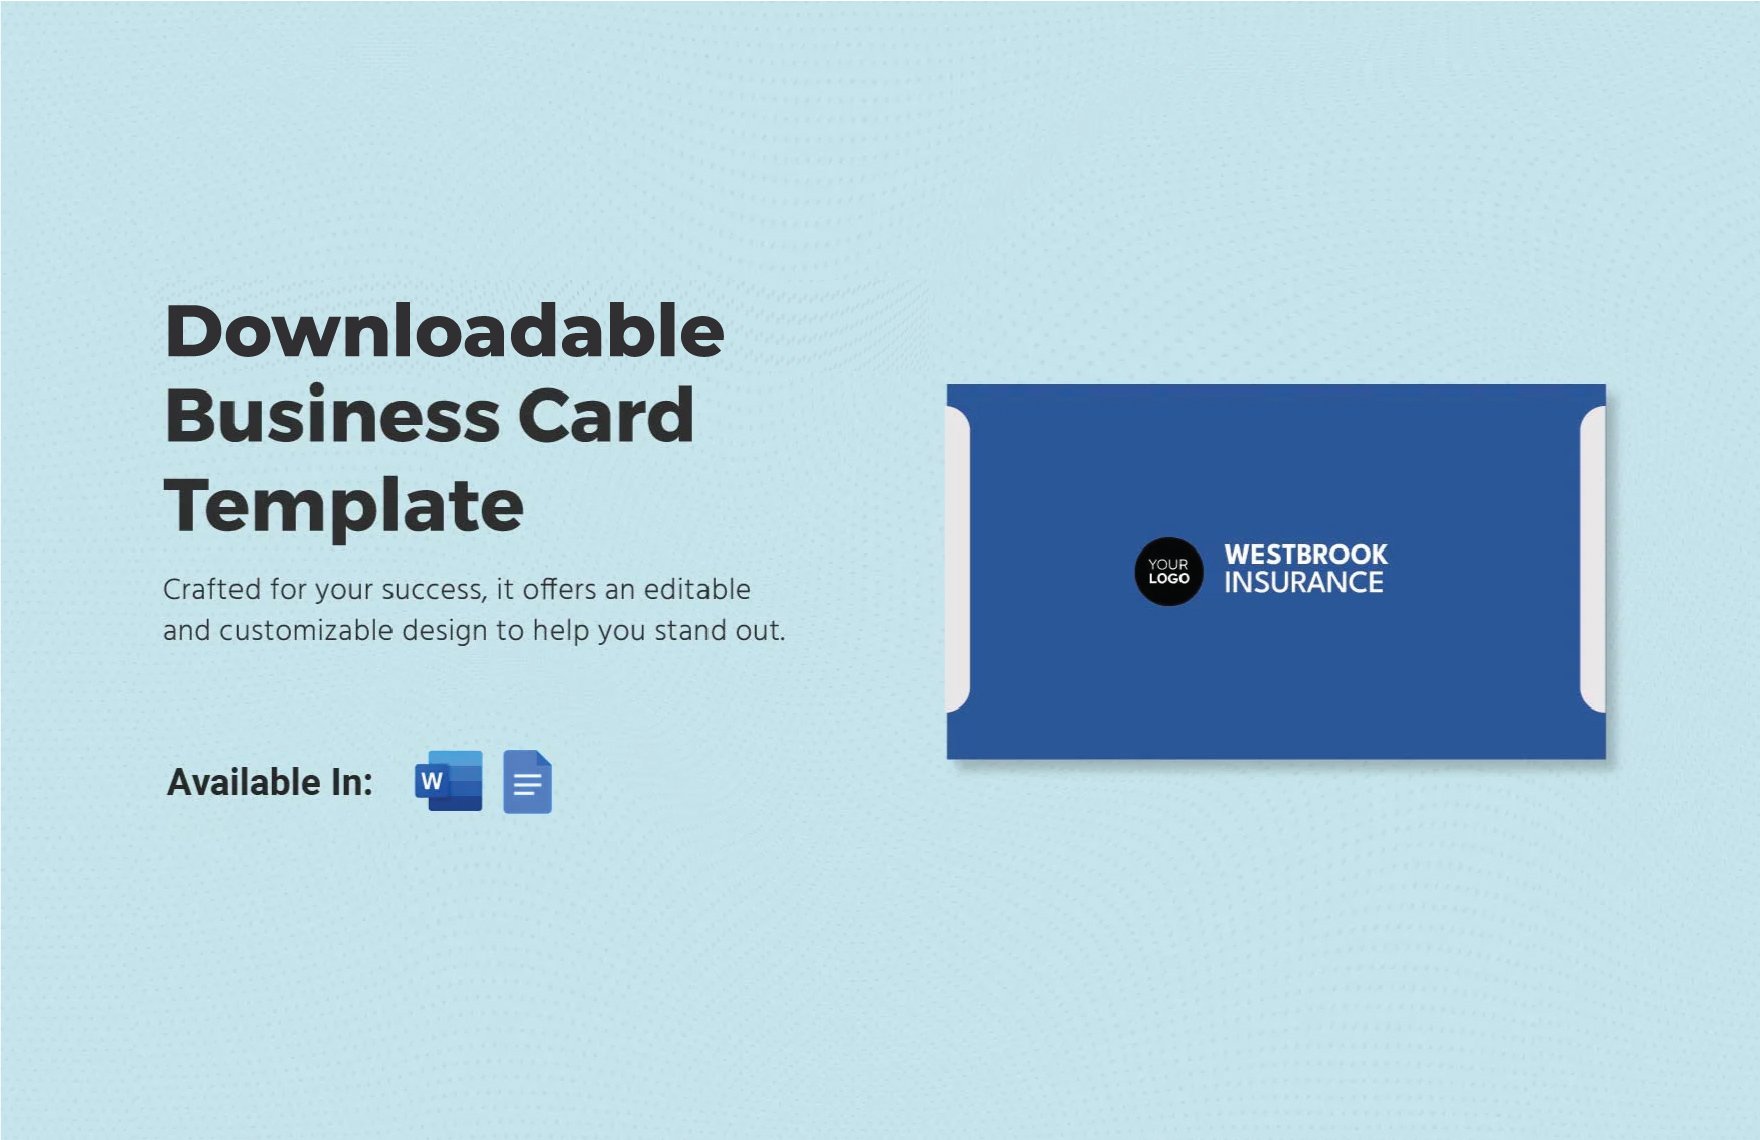 Free Downloadable Business Card Template in Word, Google Docs, InDesign